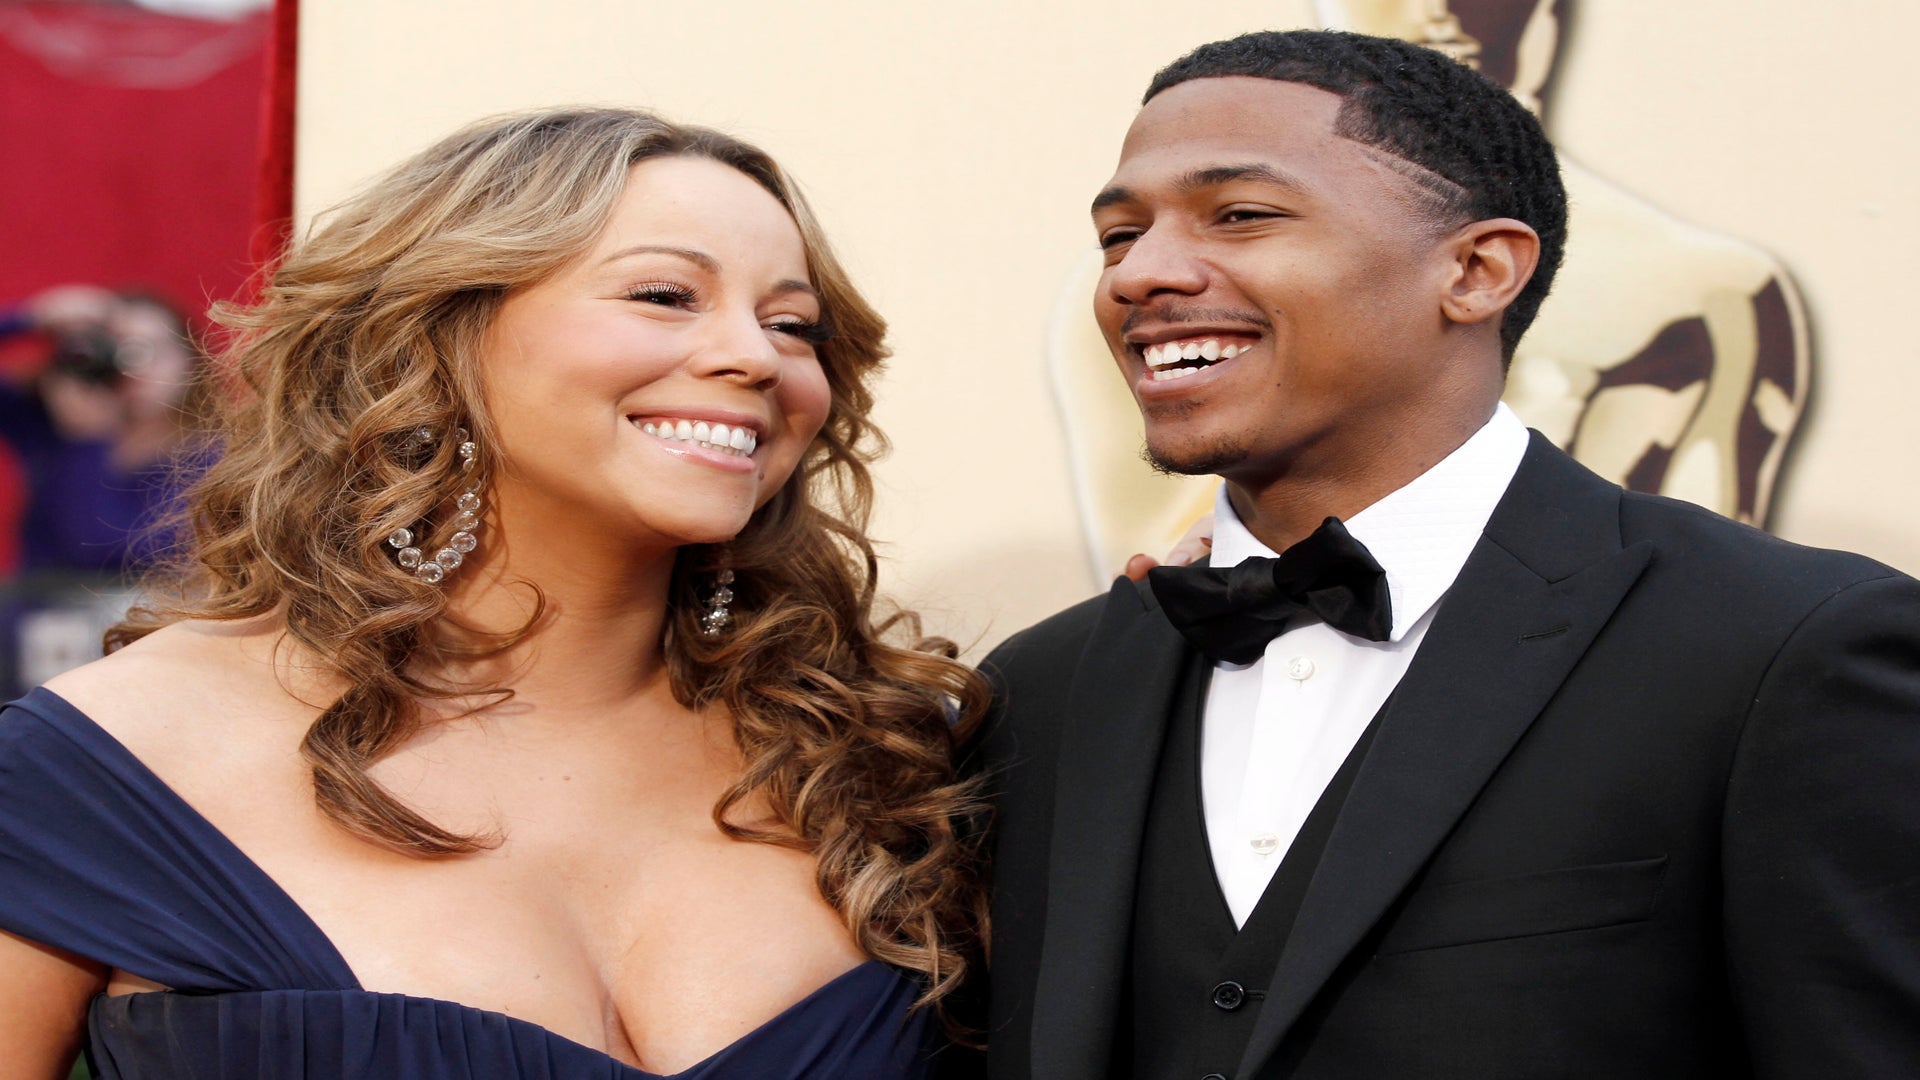 Who's worth more Nick Cannon or Mariah Carey?